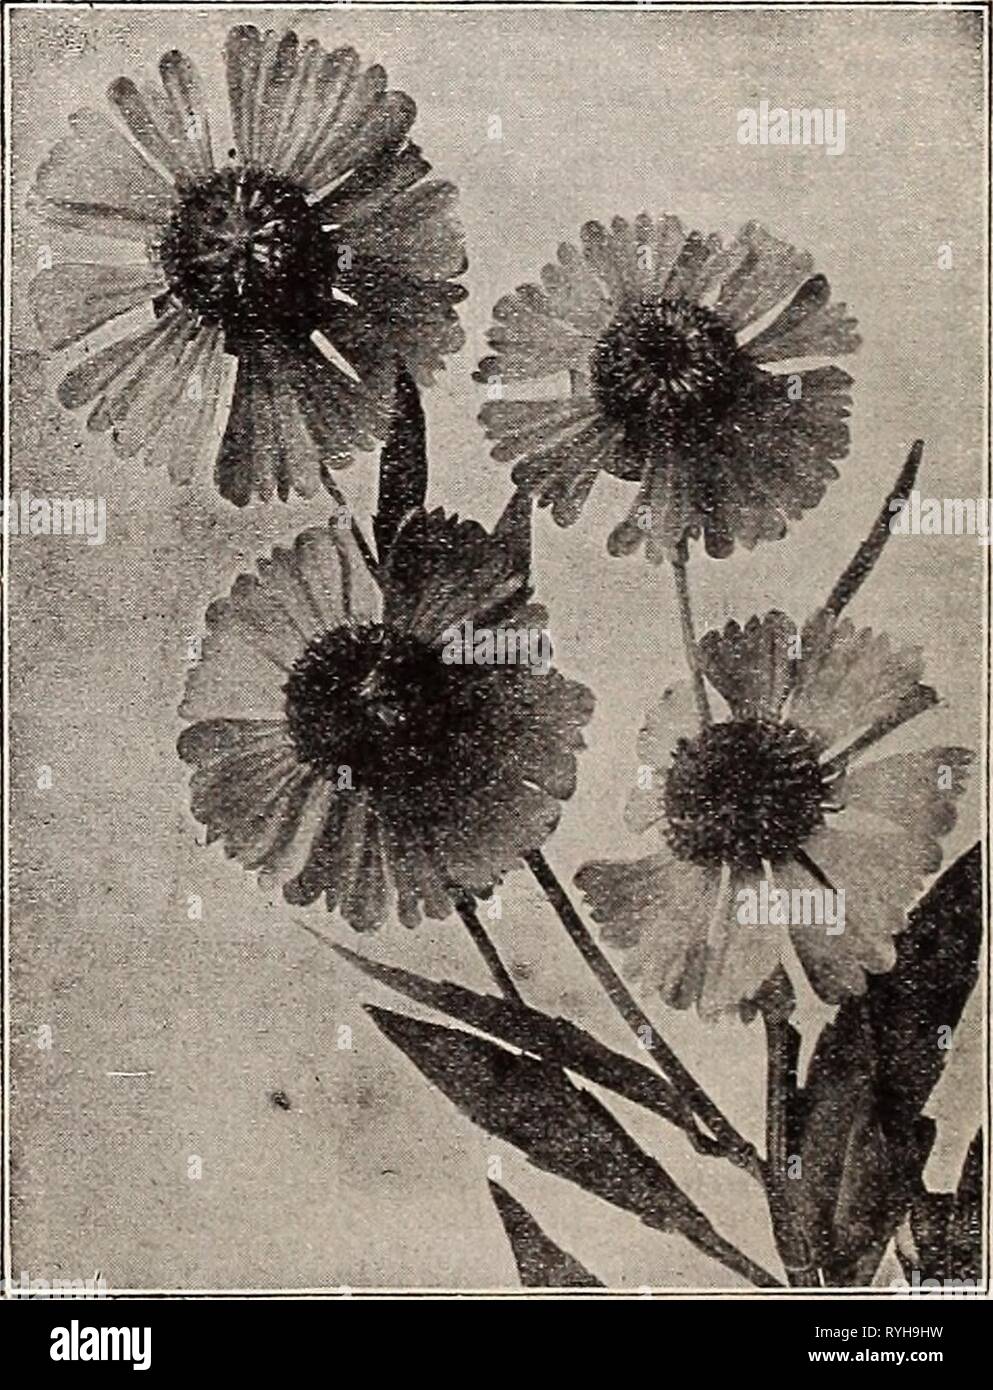 Dreer's wholesale price list for florists : flower seeds plants and bulbs vegetable and lawn grass seeds sundries  dreerswholesalep1934henr 0 Year: 1934  Gaillardia Grandiflora Gaillardia (Blanket Flower) One of the showiest and most effective hardy peren- nial plants, and should find a place in every hardy border, also splendid for cutting; 2 feet. Tr. pkt. Oz. Grandiflora Burgundy. Lovely wine-red flowers on long- stems $0 50 $3 50 Grandiflora Compacta Mixed. A compact variety, forming bushy plants 12 to 15 inches high, and bearing long-stem- med flowers well above the foliage... 20 75 Grand Stock Photo